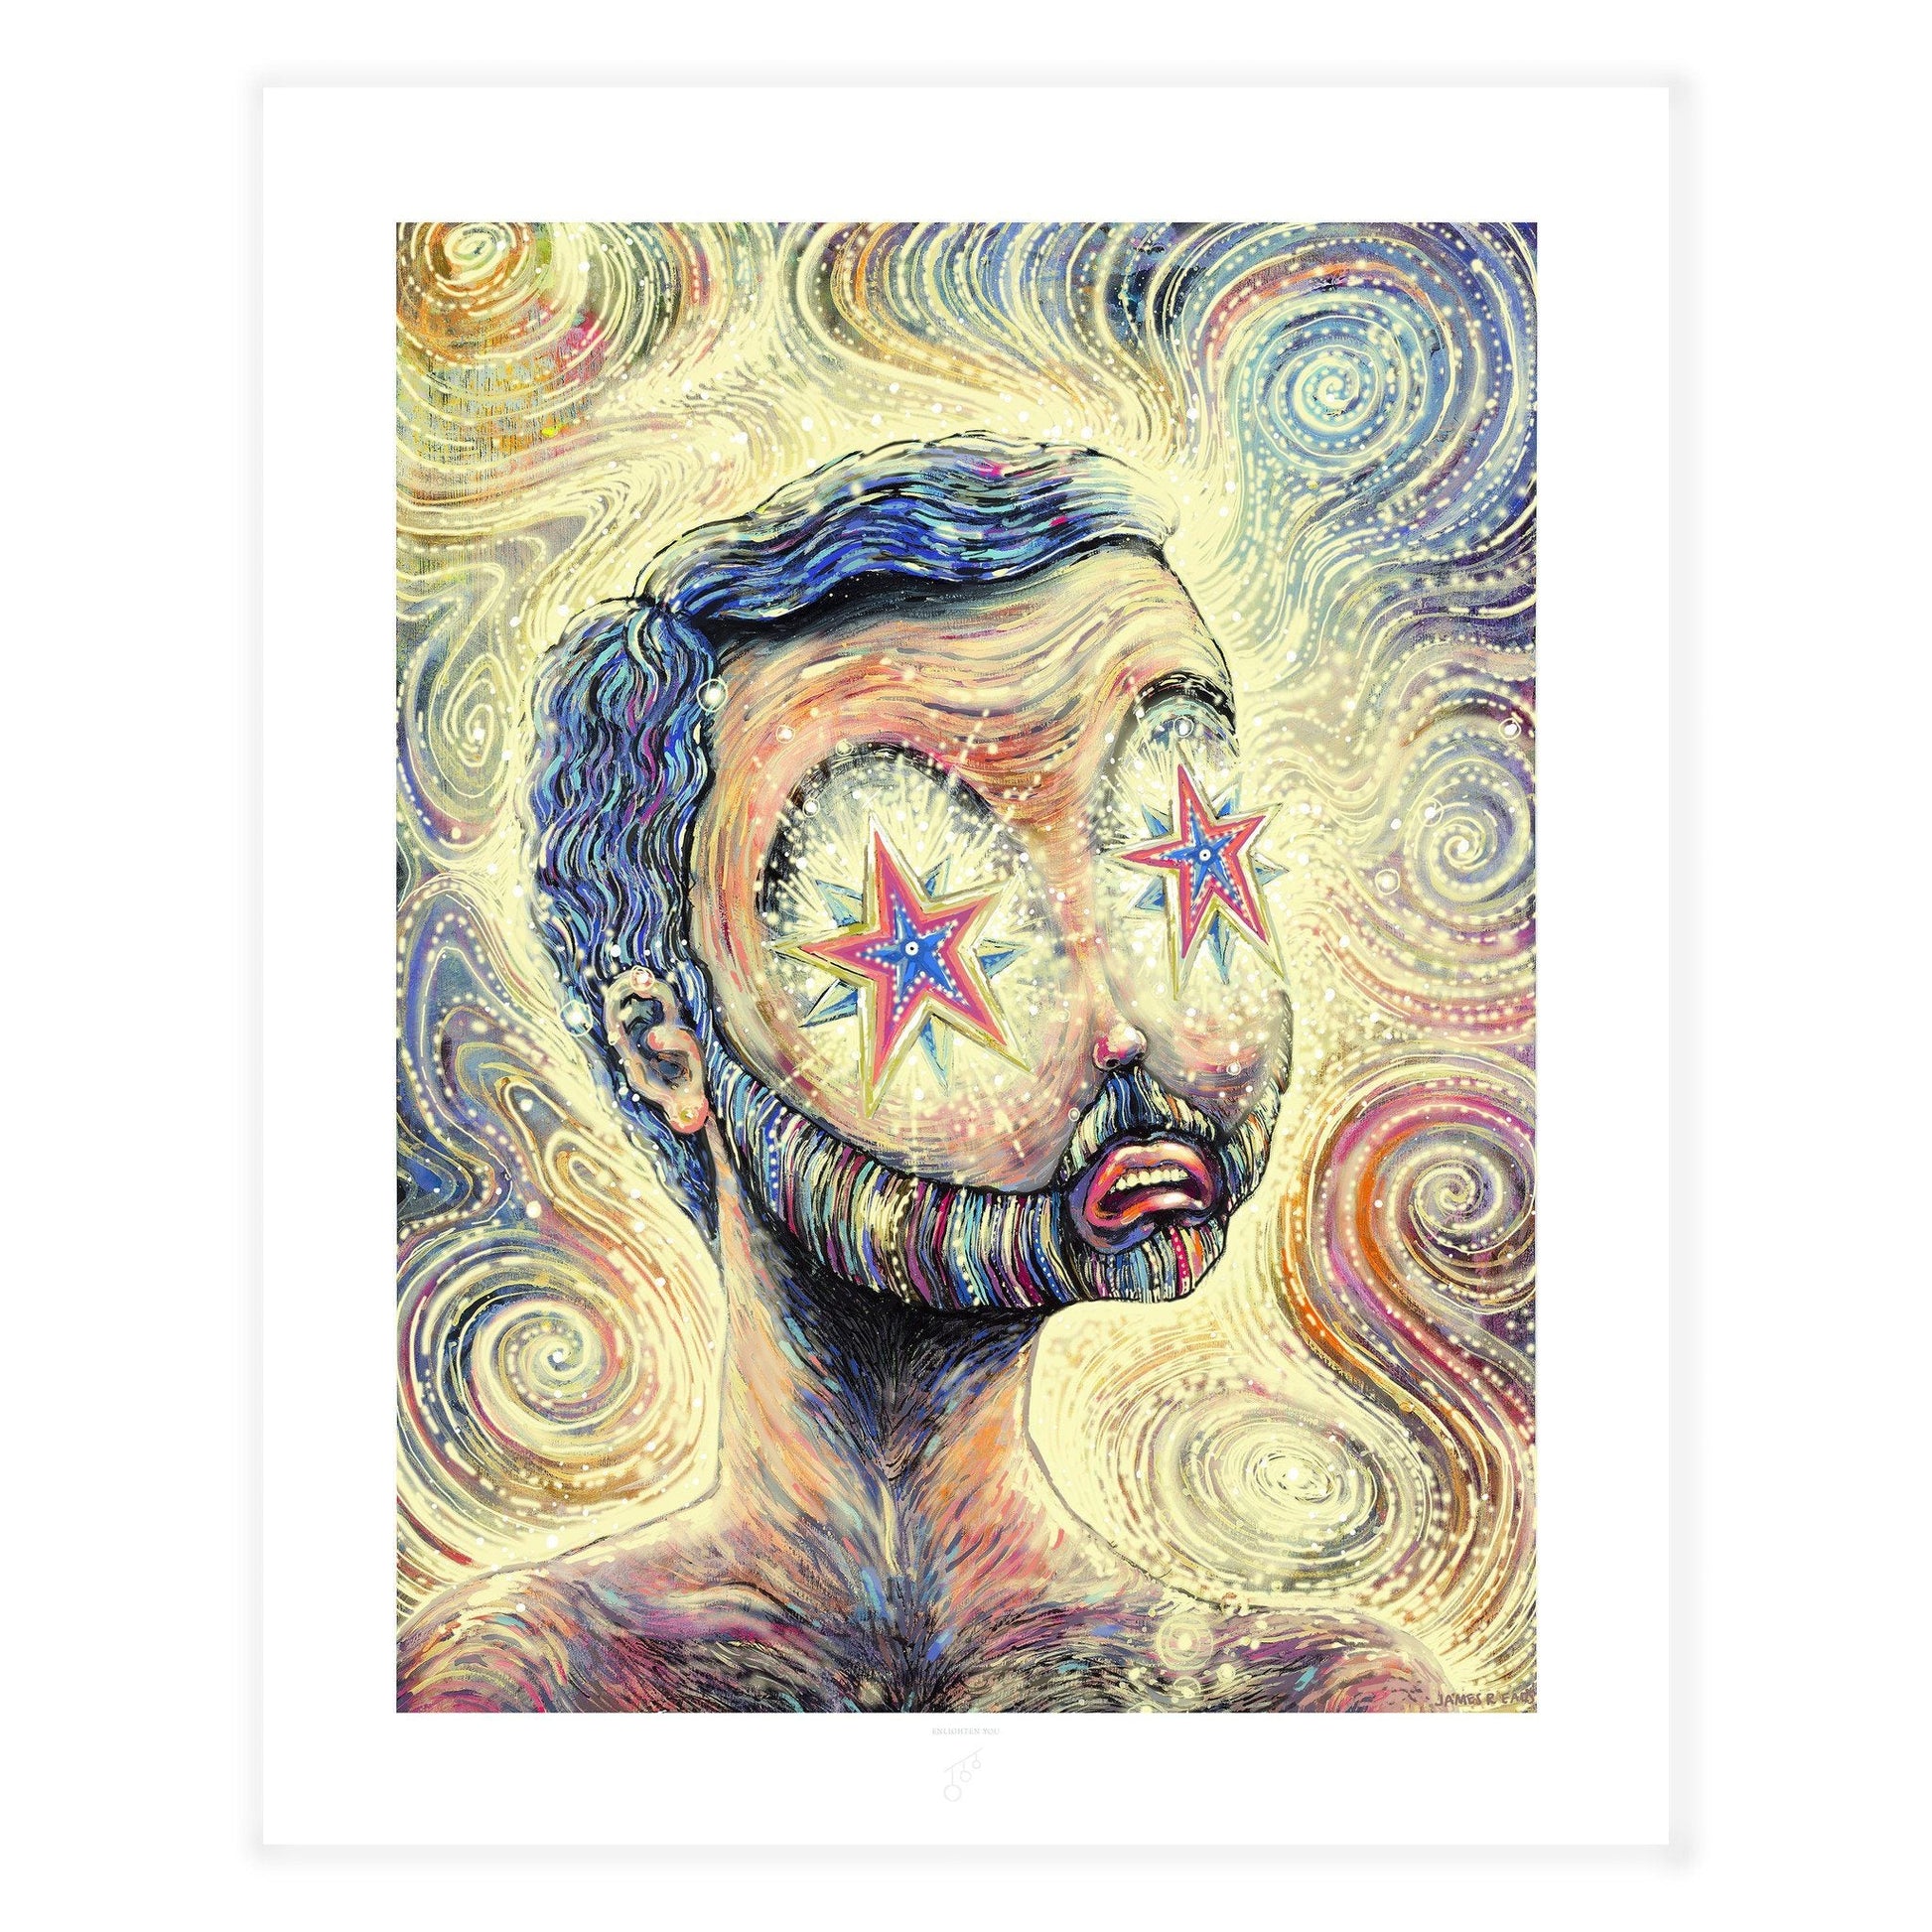 Enlighten You (Limited Edition of 75) Print James R. Eads